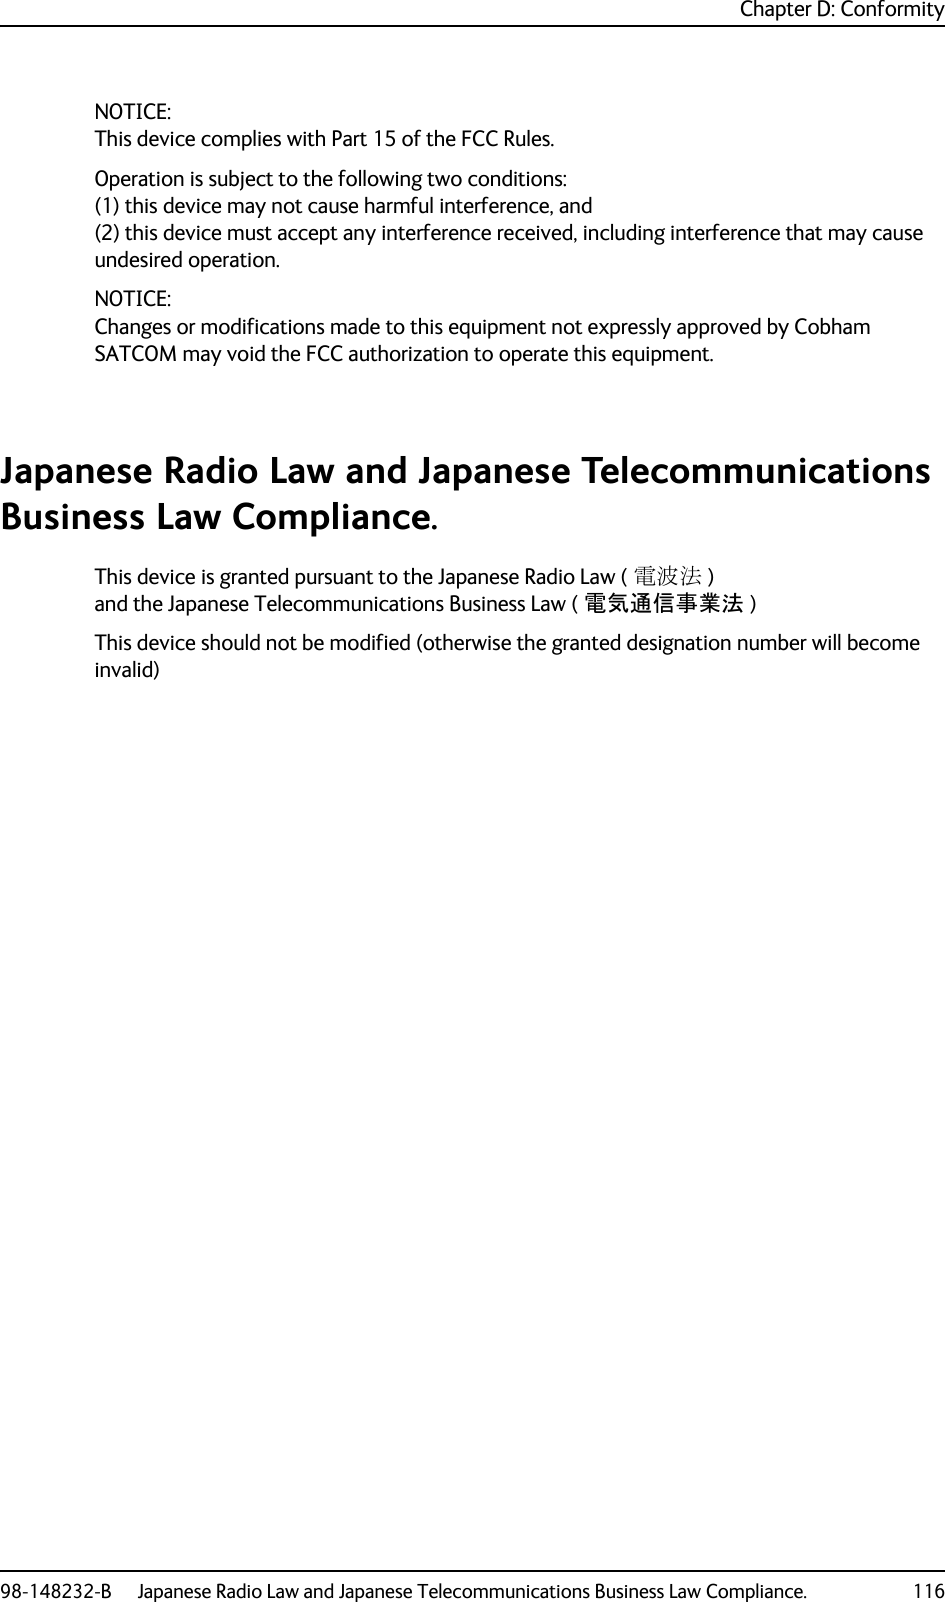 Chapter D: Conformity98-148232-B Japanese Radio Law and Japanese Telecommunications Business Law Compliance. 116NOTICE:This device complies with Part 15 of the FCC Rules.Operation is subject to the following two conditions:(1) this device may not cause harmful interference, and (2) this device must accept any interference received, including interference that may cause undesired operation.NOTICE:Changes or modifications made to this equipment not expressly approved by Cobham SATCOM may void the FCC authorization to operate this equipment.Japanese Radio Law and Japanese Telecommunications Business Law Compliance.This device is granted pursuant to the Japanese Radio Law ( 電波法 ) and the Japanese Telecommunications Business Law ( 電気通信事業法 )This device should not be modified (otherwise the granted designation number will become invalid)